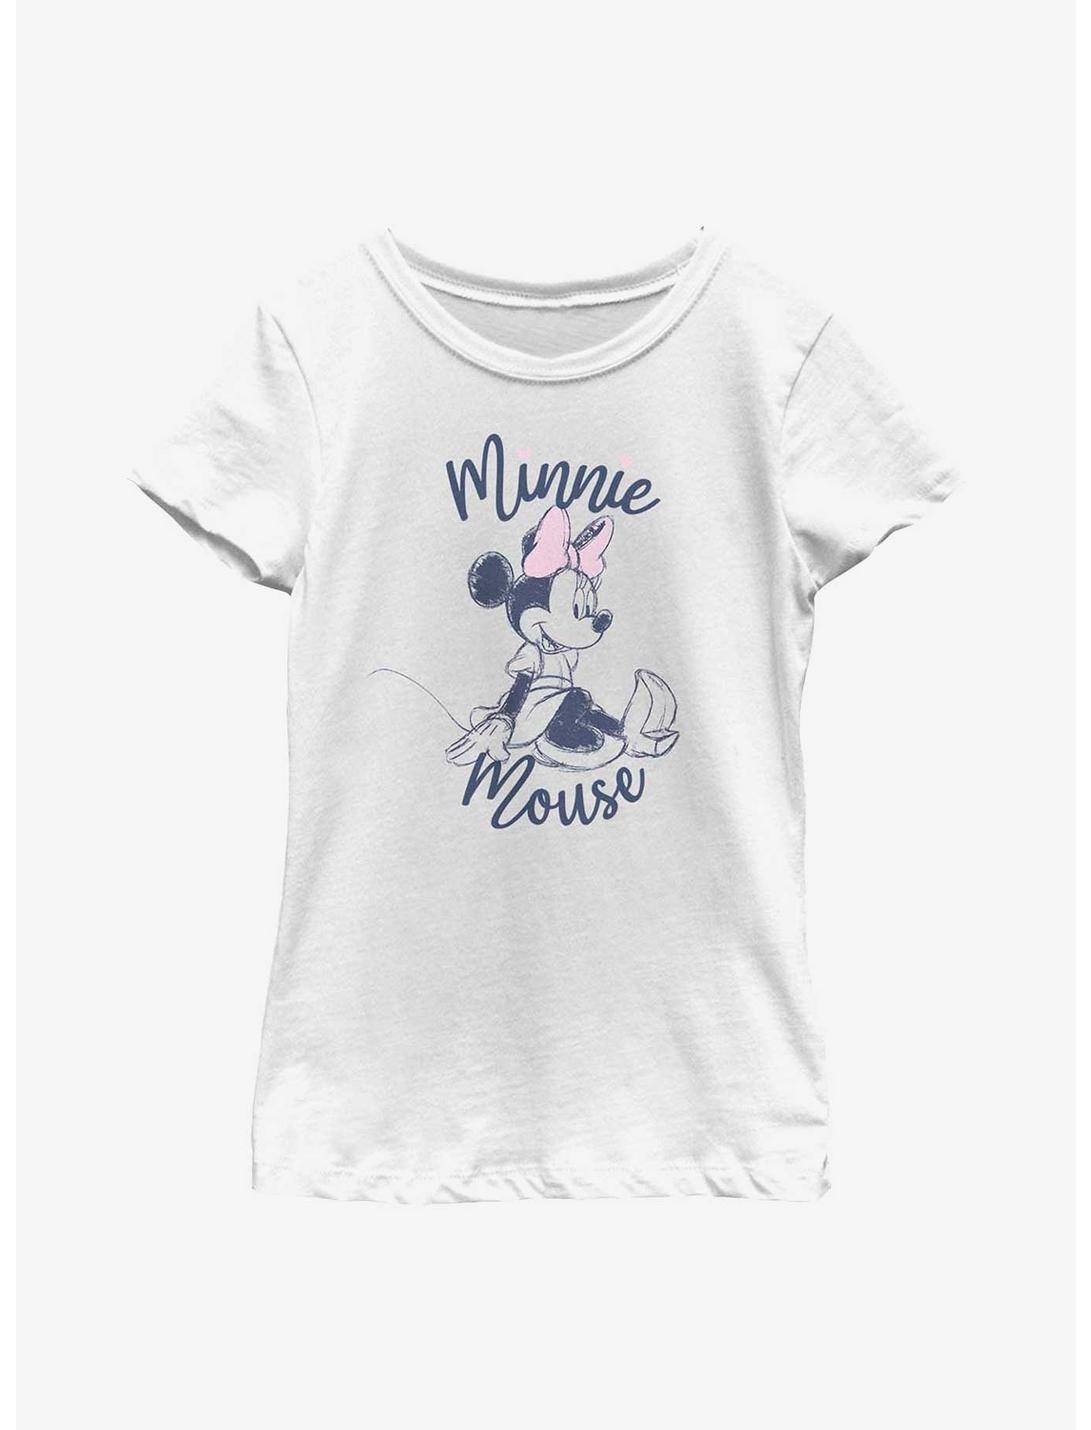 Disney Minnie Mouse Sitting Youth Girls T-Shirt, WHITE, hi-res